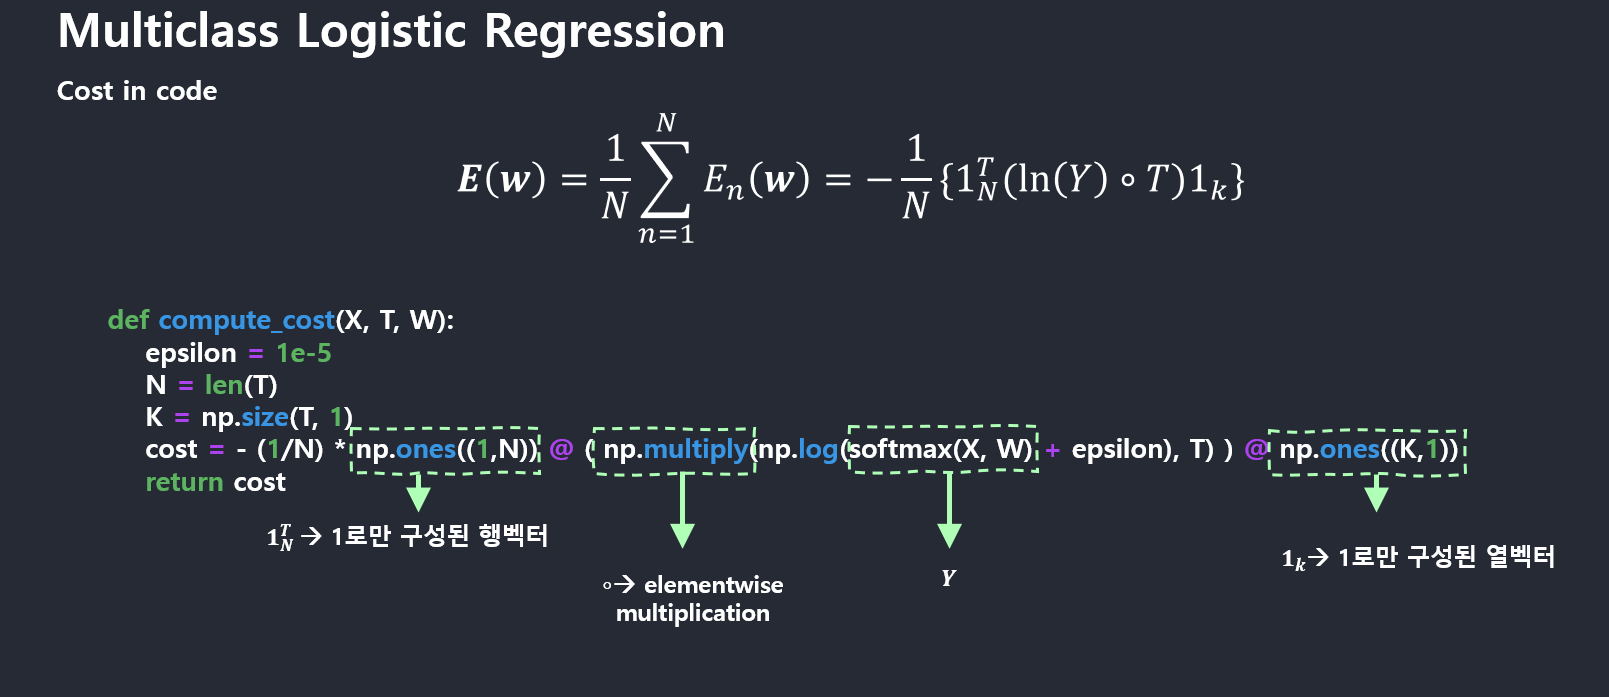 multiclass-logistic-regression-cost-function-in-code